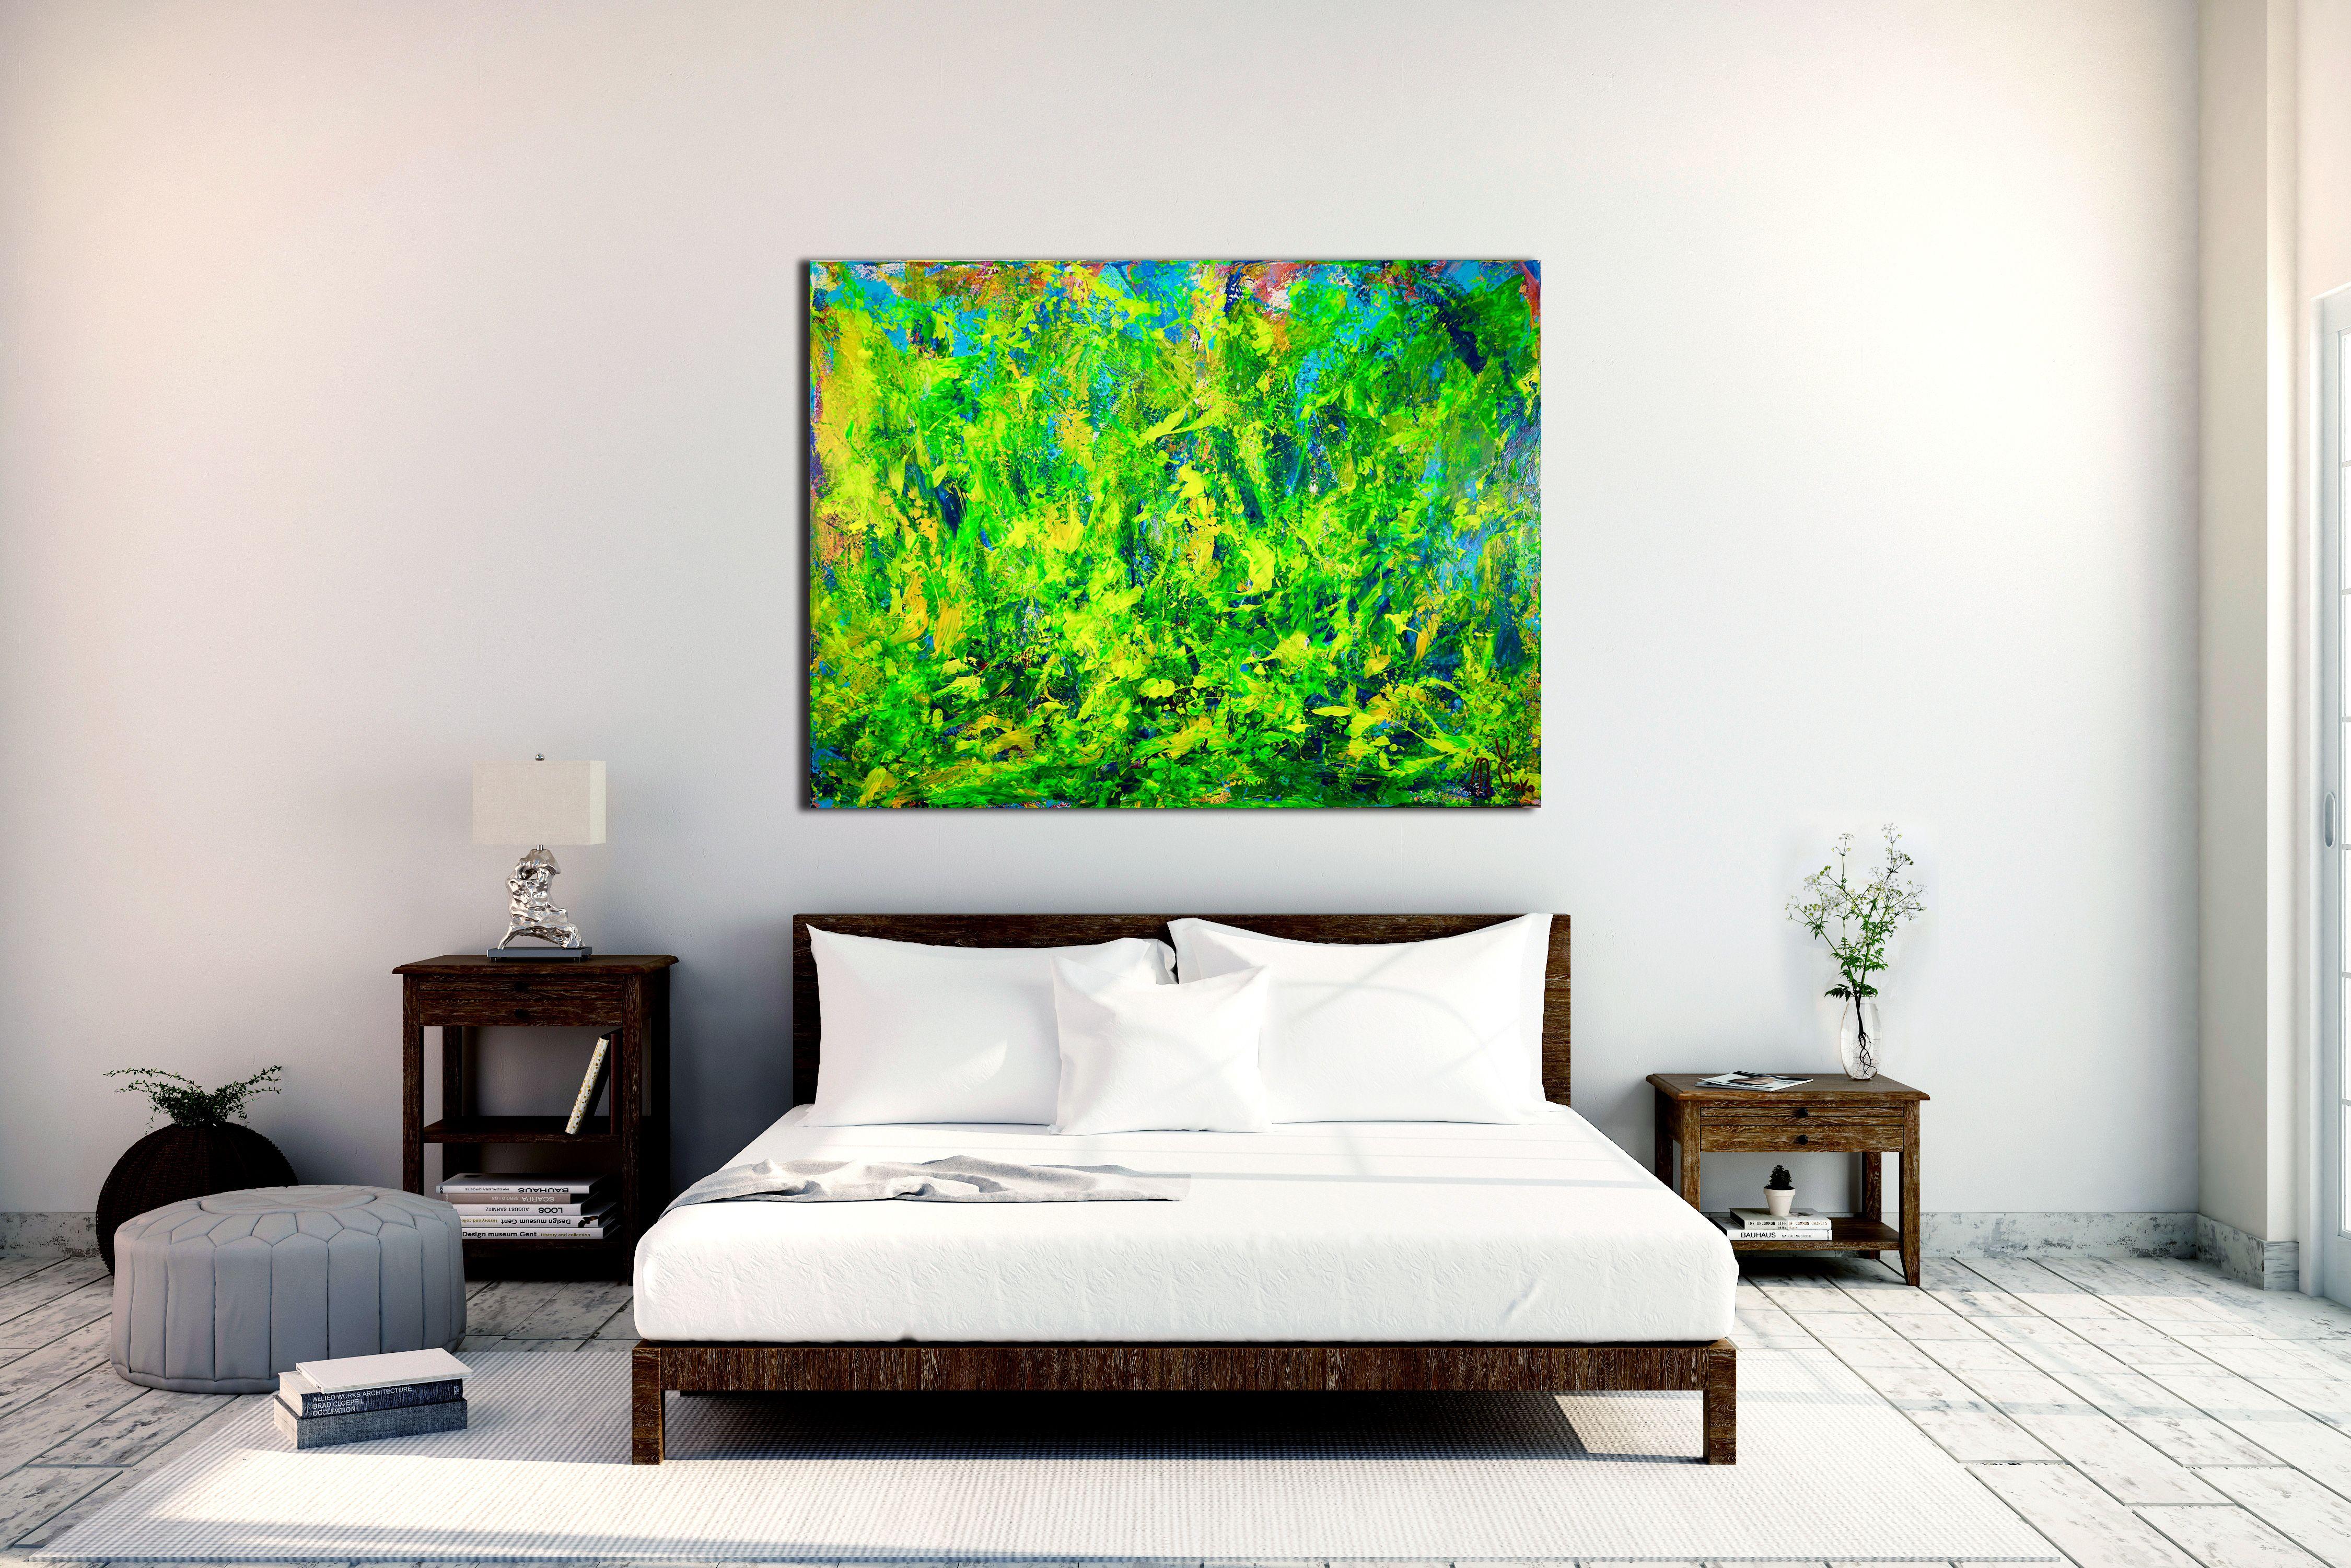 Changes-Translucent yellow organic abstract landsc, Painting, Acrylic on Canvas - Green Abstract Painting by Nestor Toro